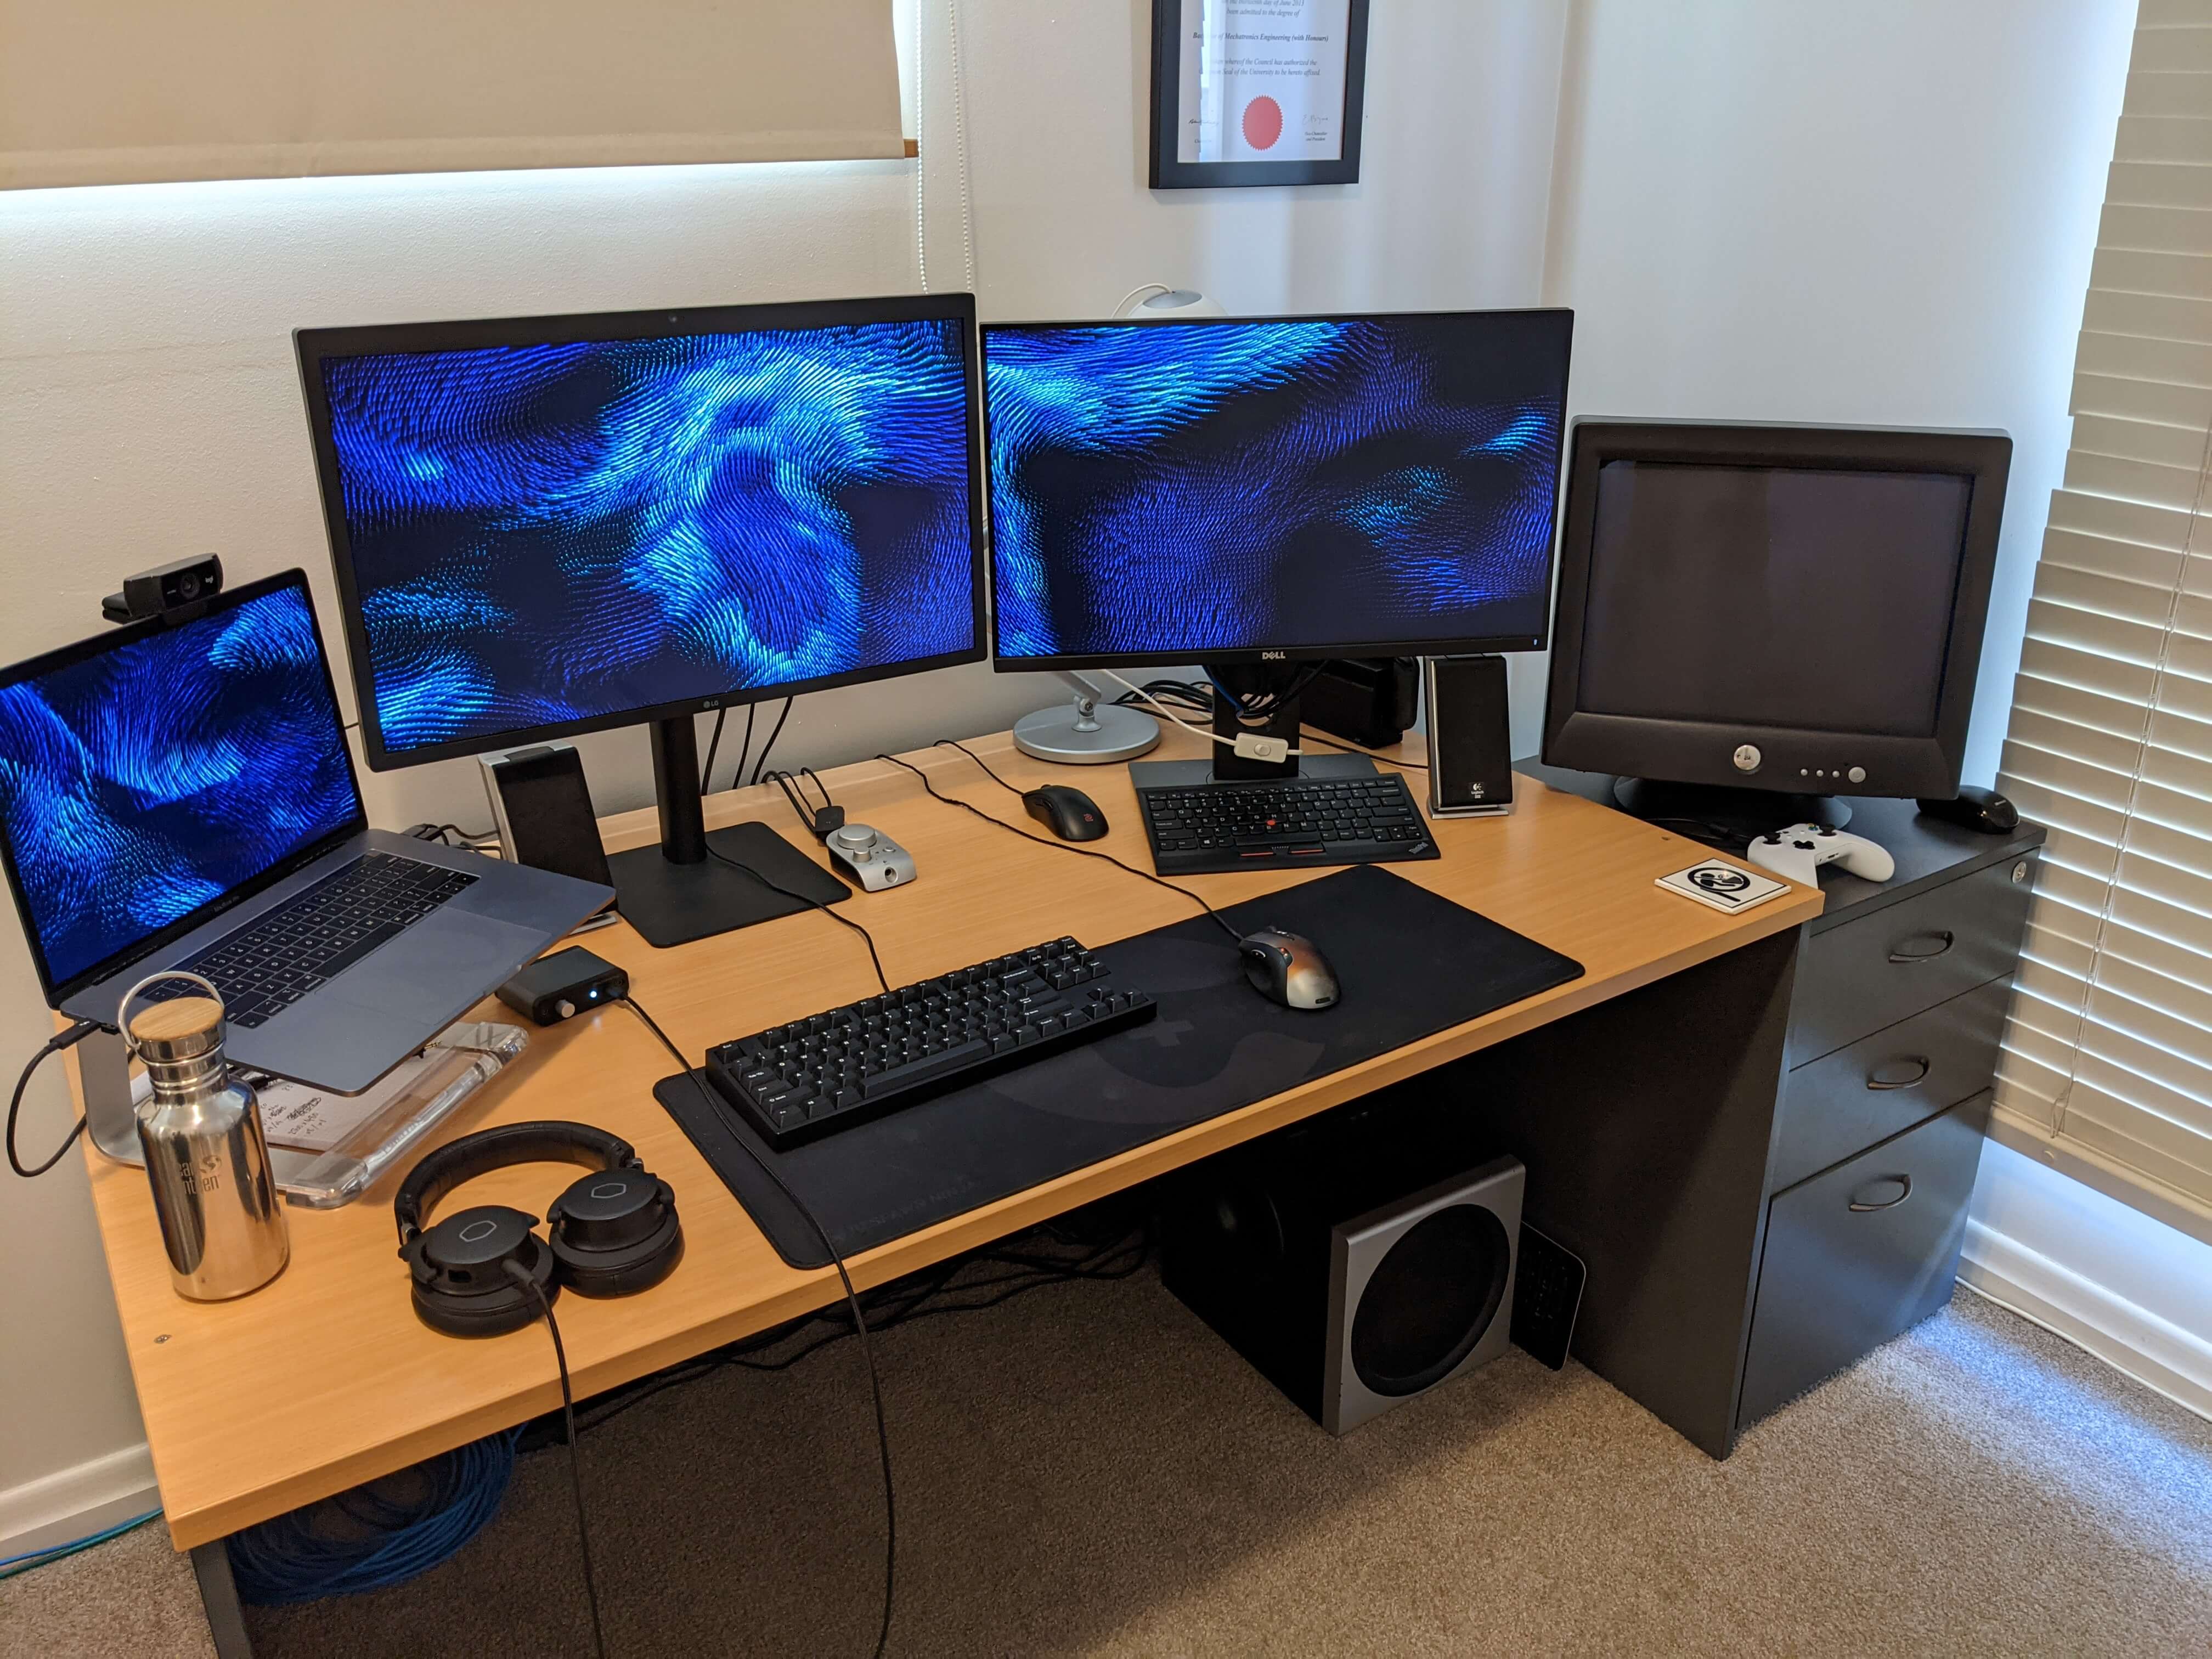 My desk and computer hardware